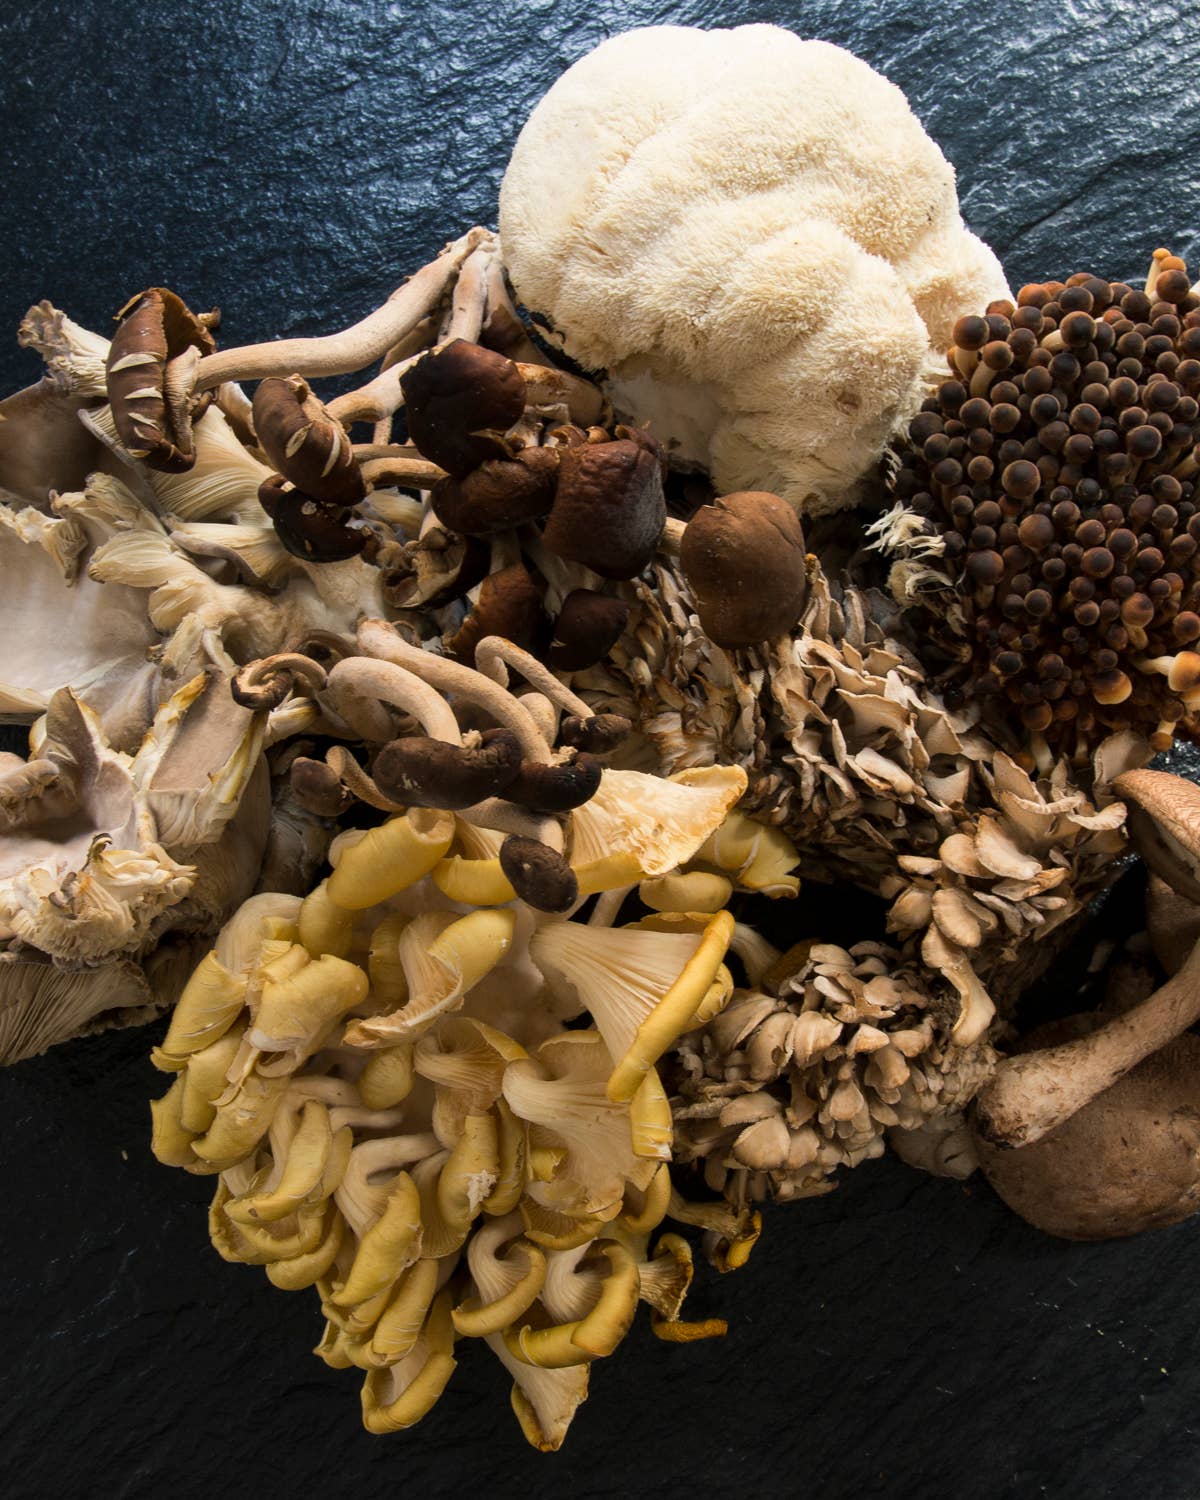 What to Do with a Delivery of Wild Mushrooms